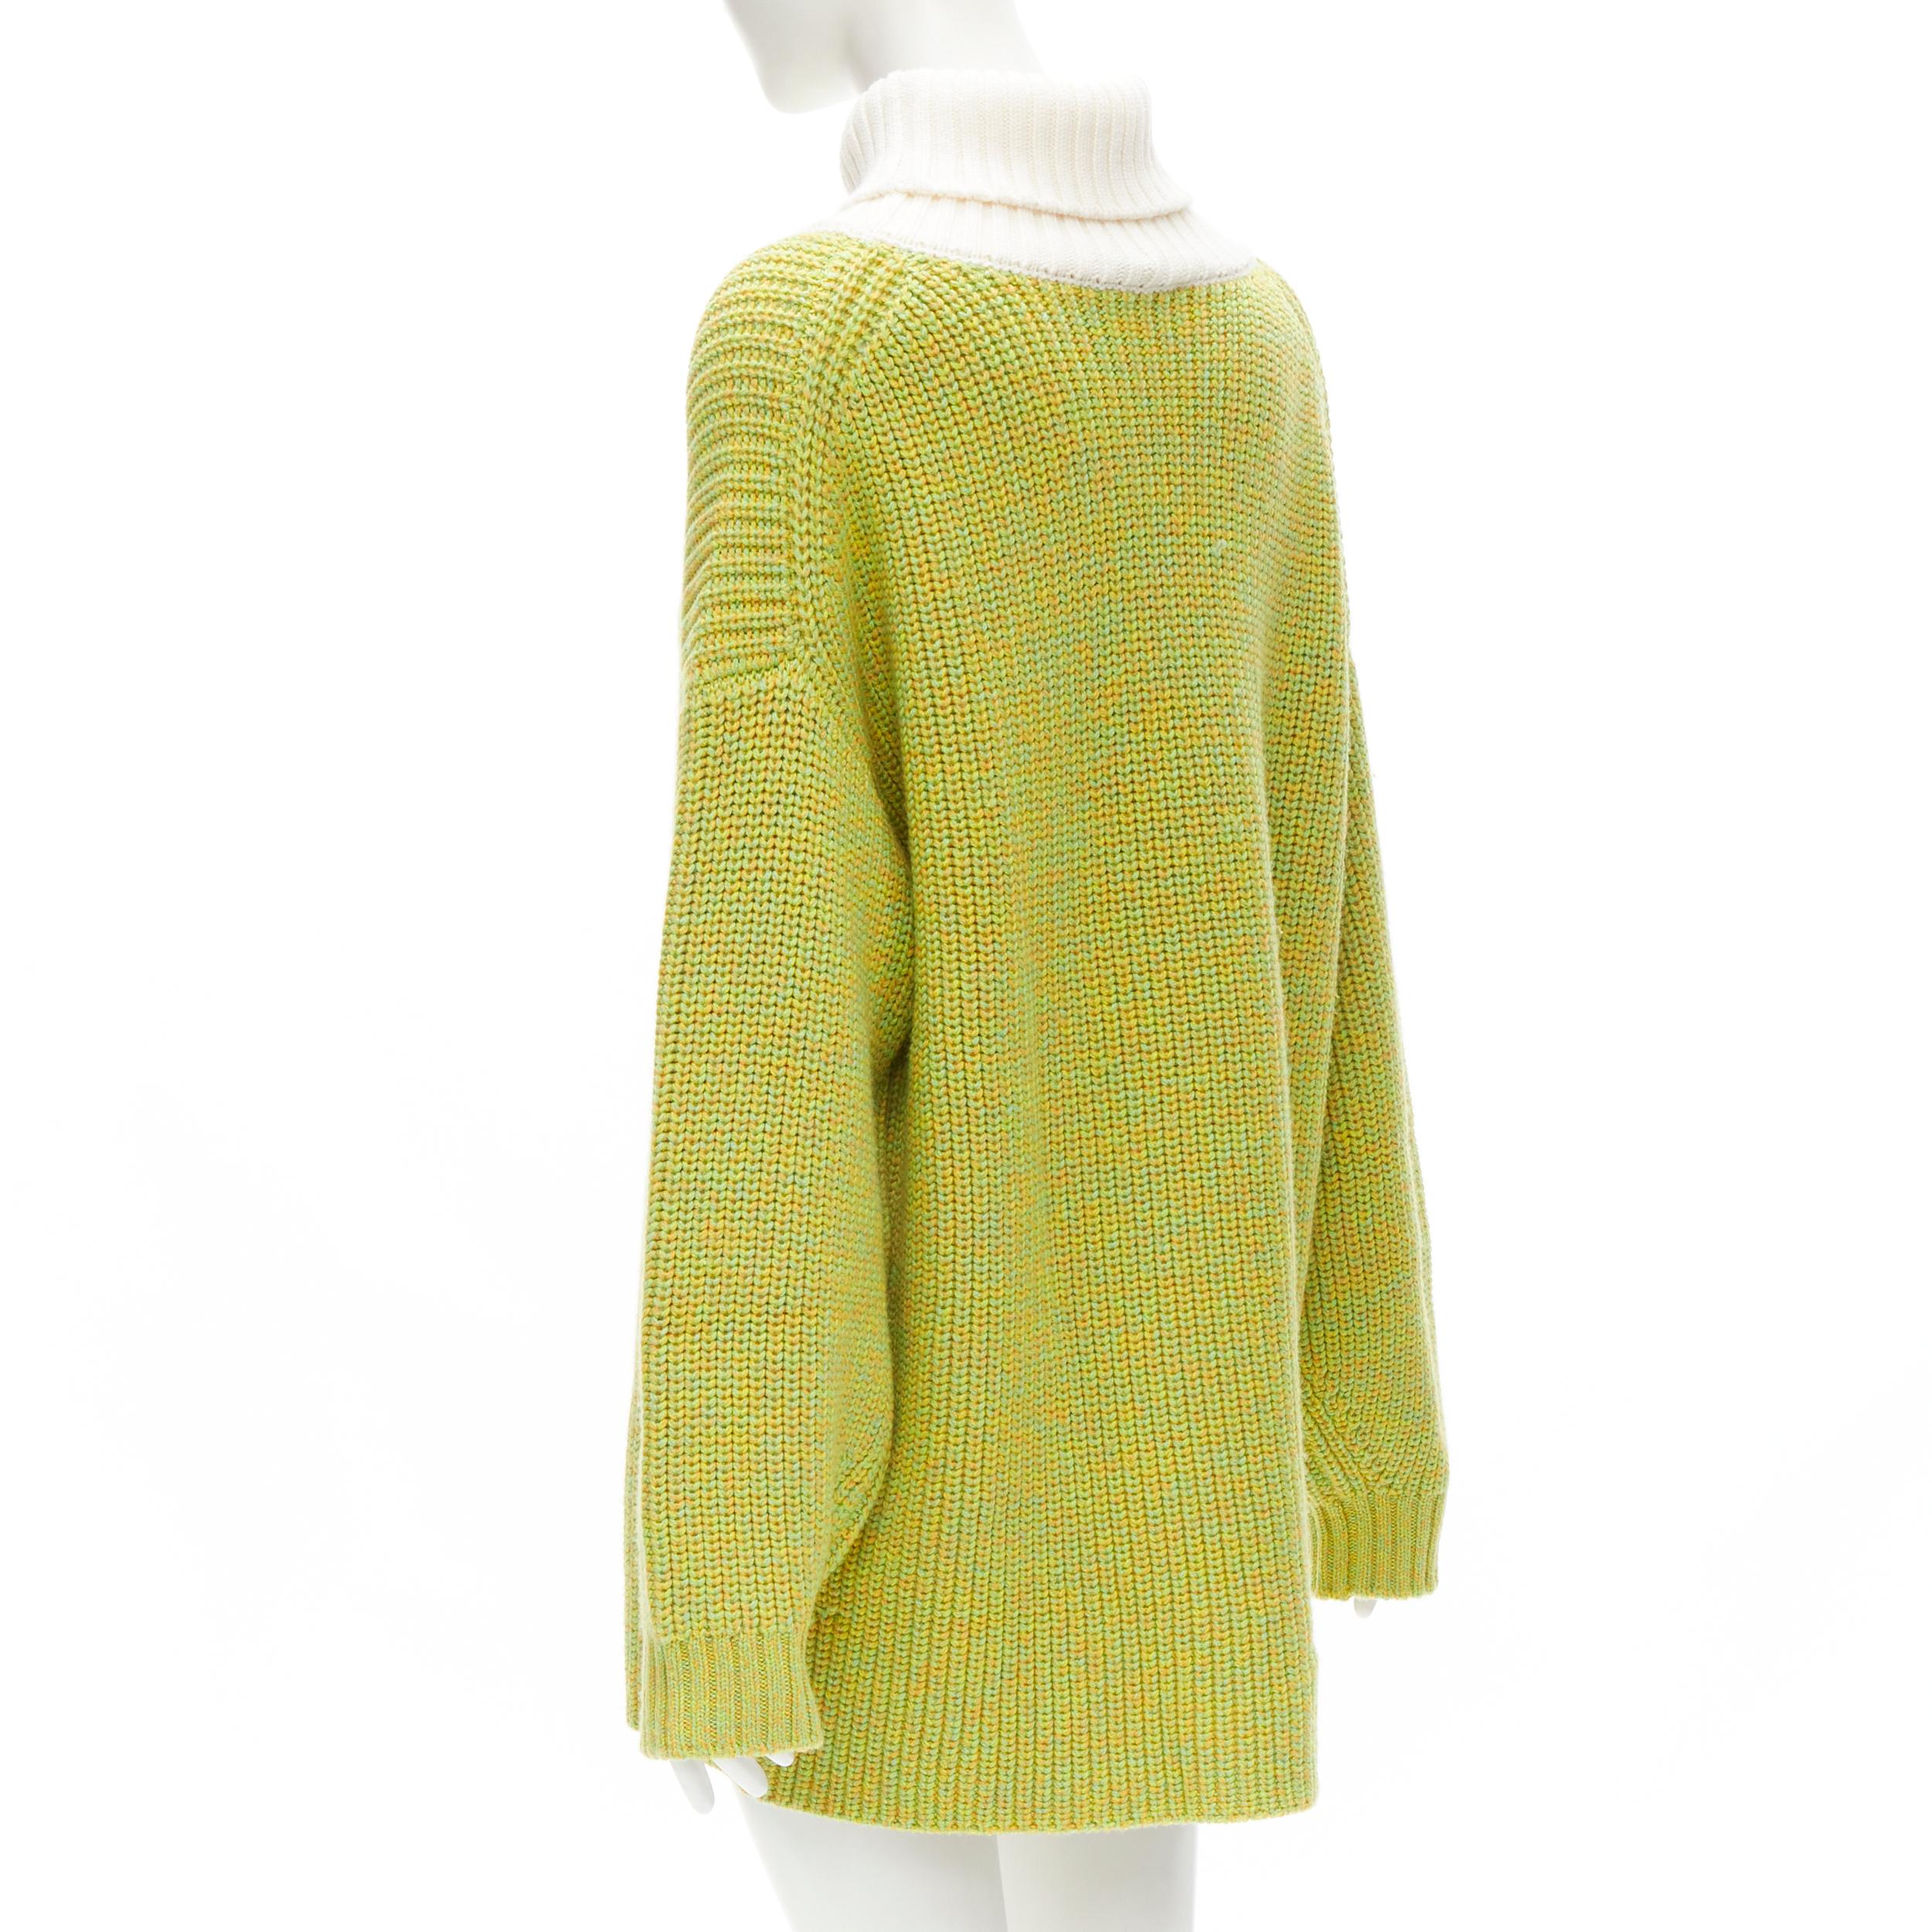 TIBI 100% merino wool lime yellow contrast rolled turtleneck sweater M/L For Sale 1